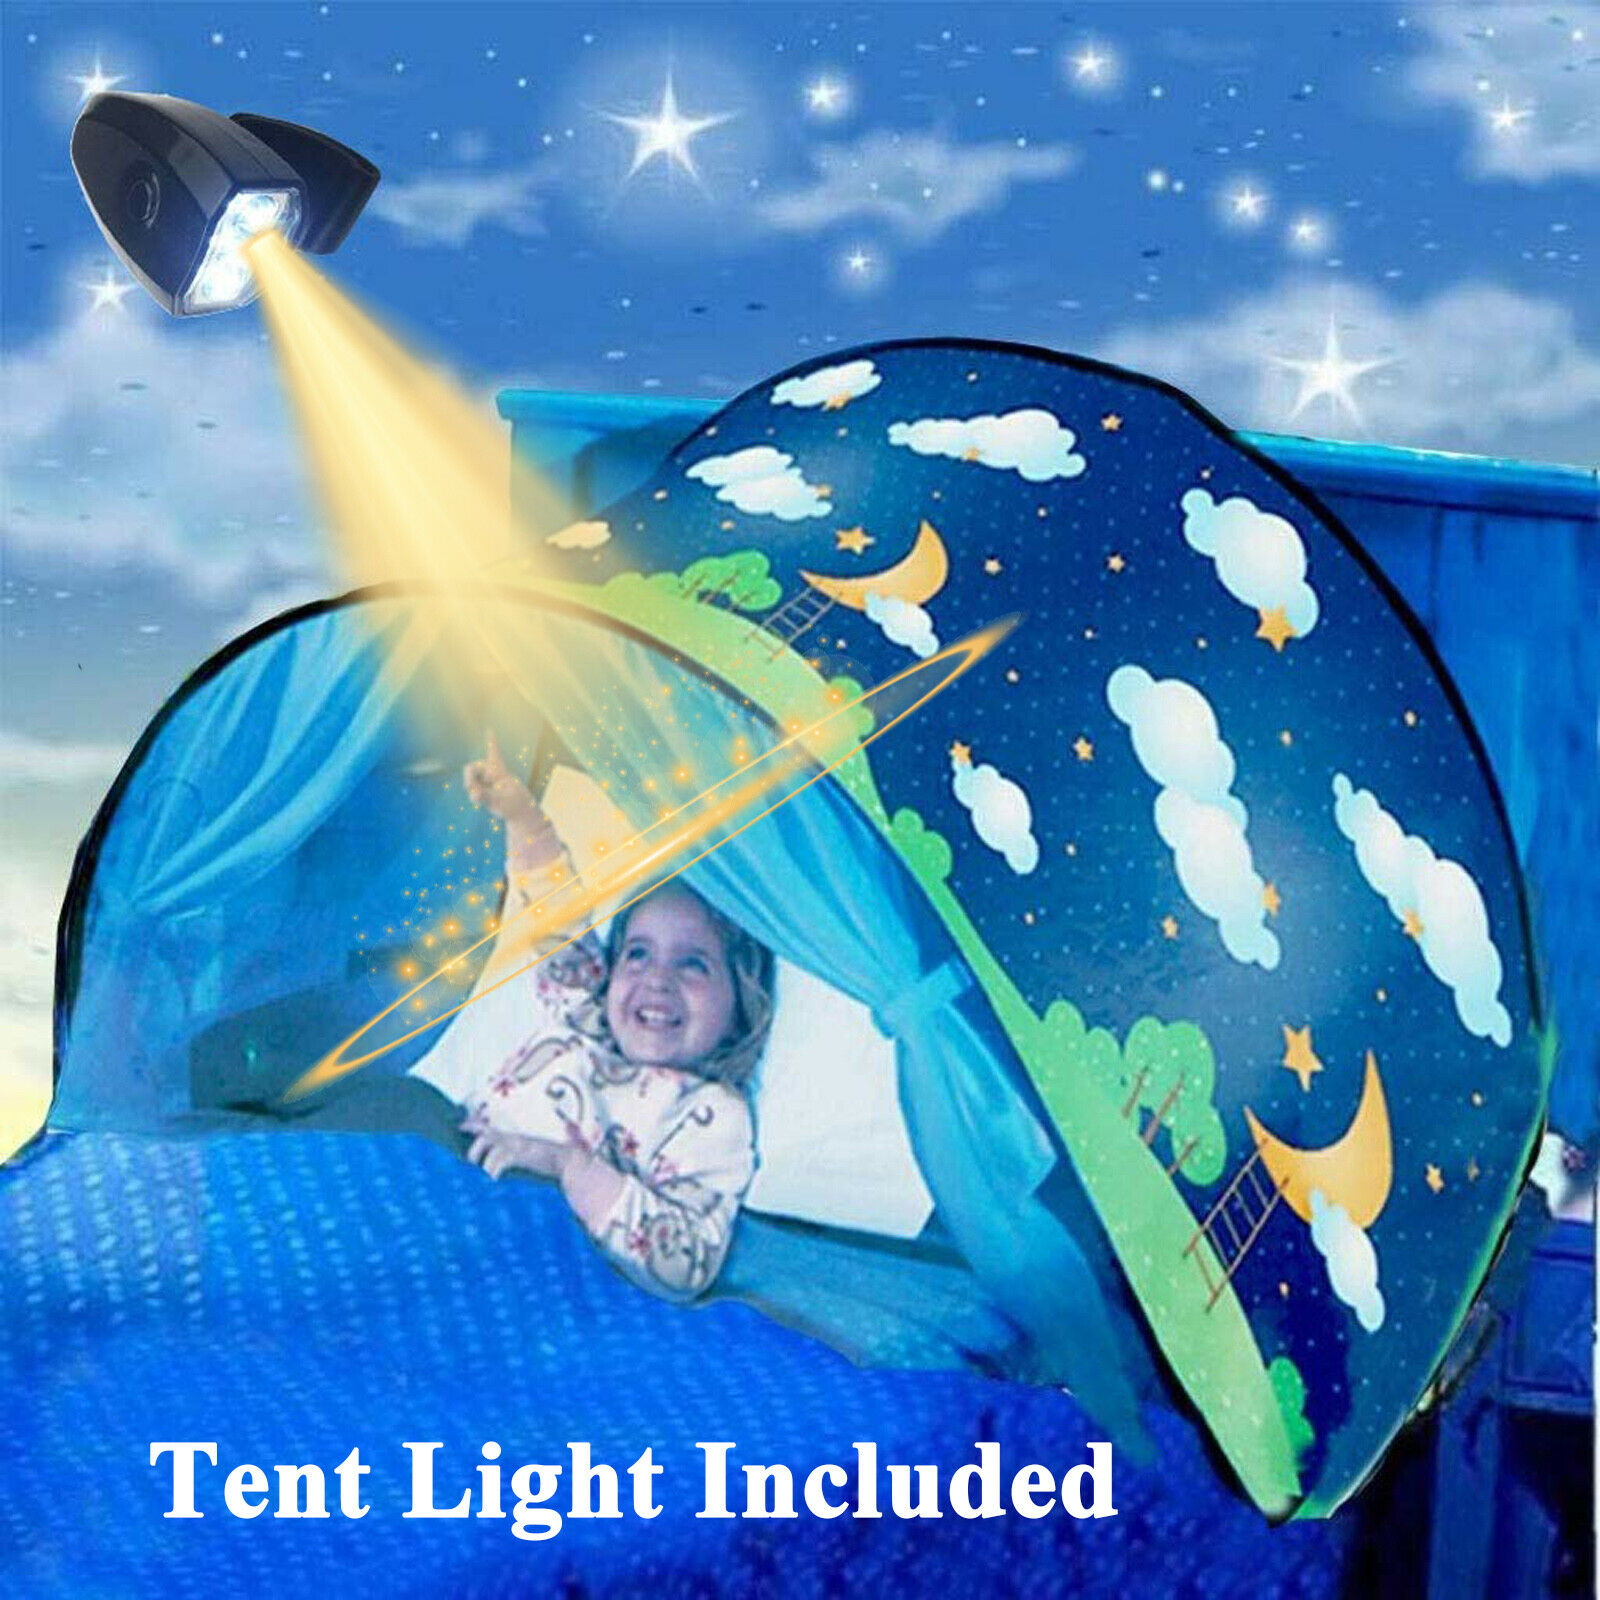 Kids Dream Tents Baby Pop Up Bed Tent Unicorn Foldable Playhouse Night Sleeping0 